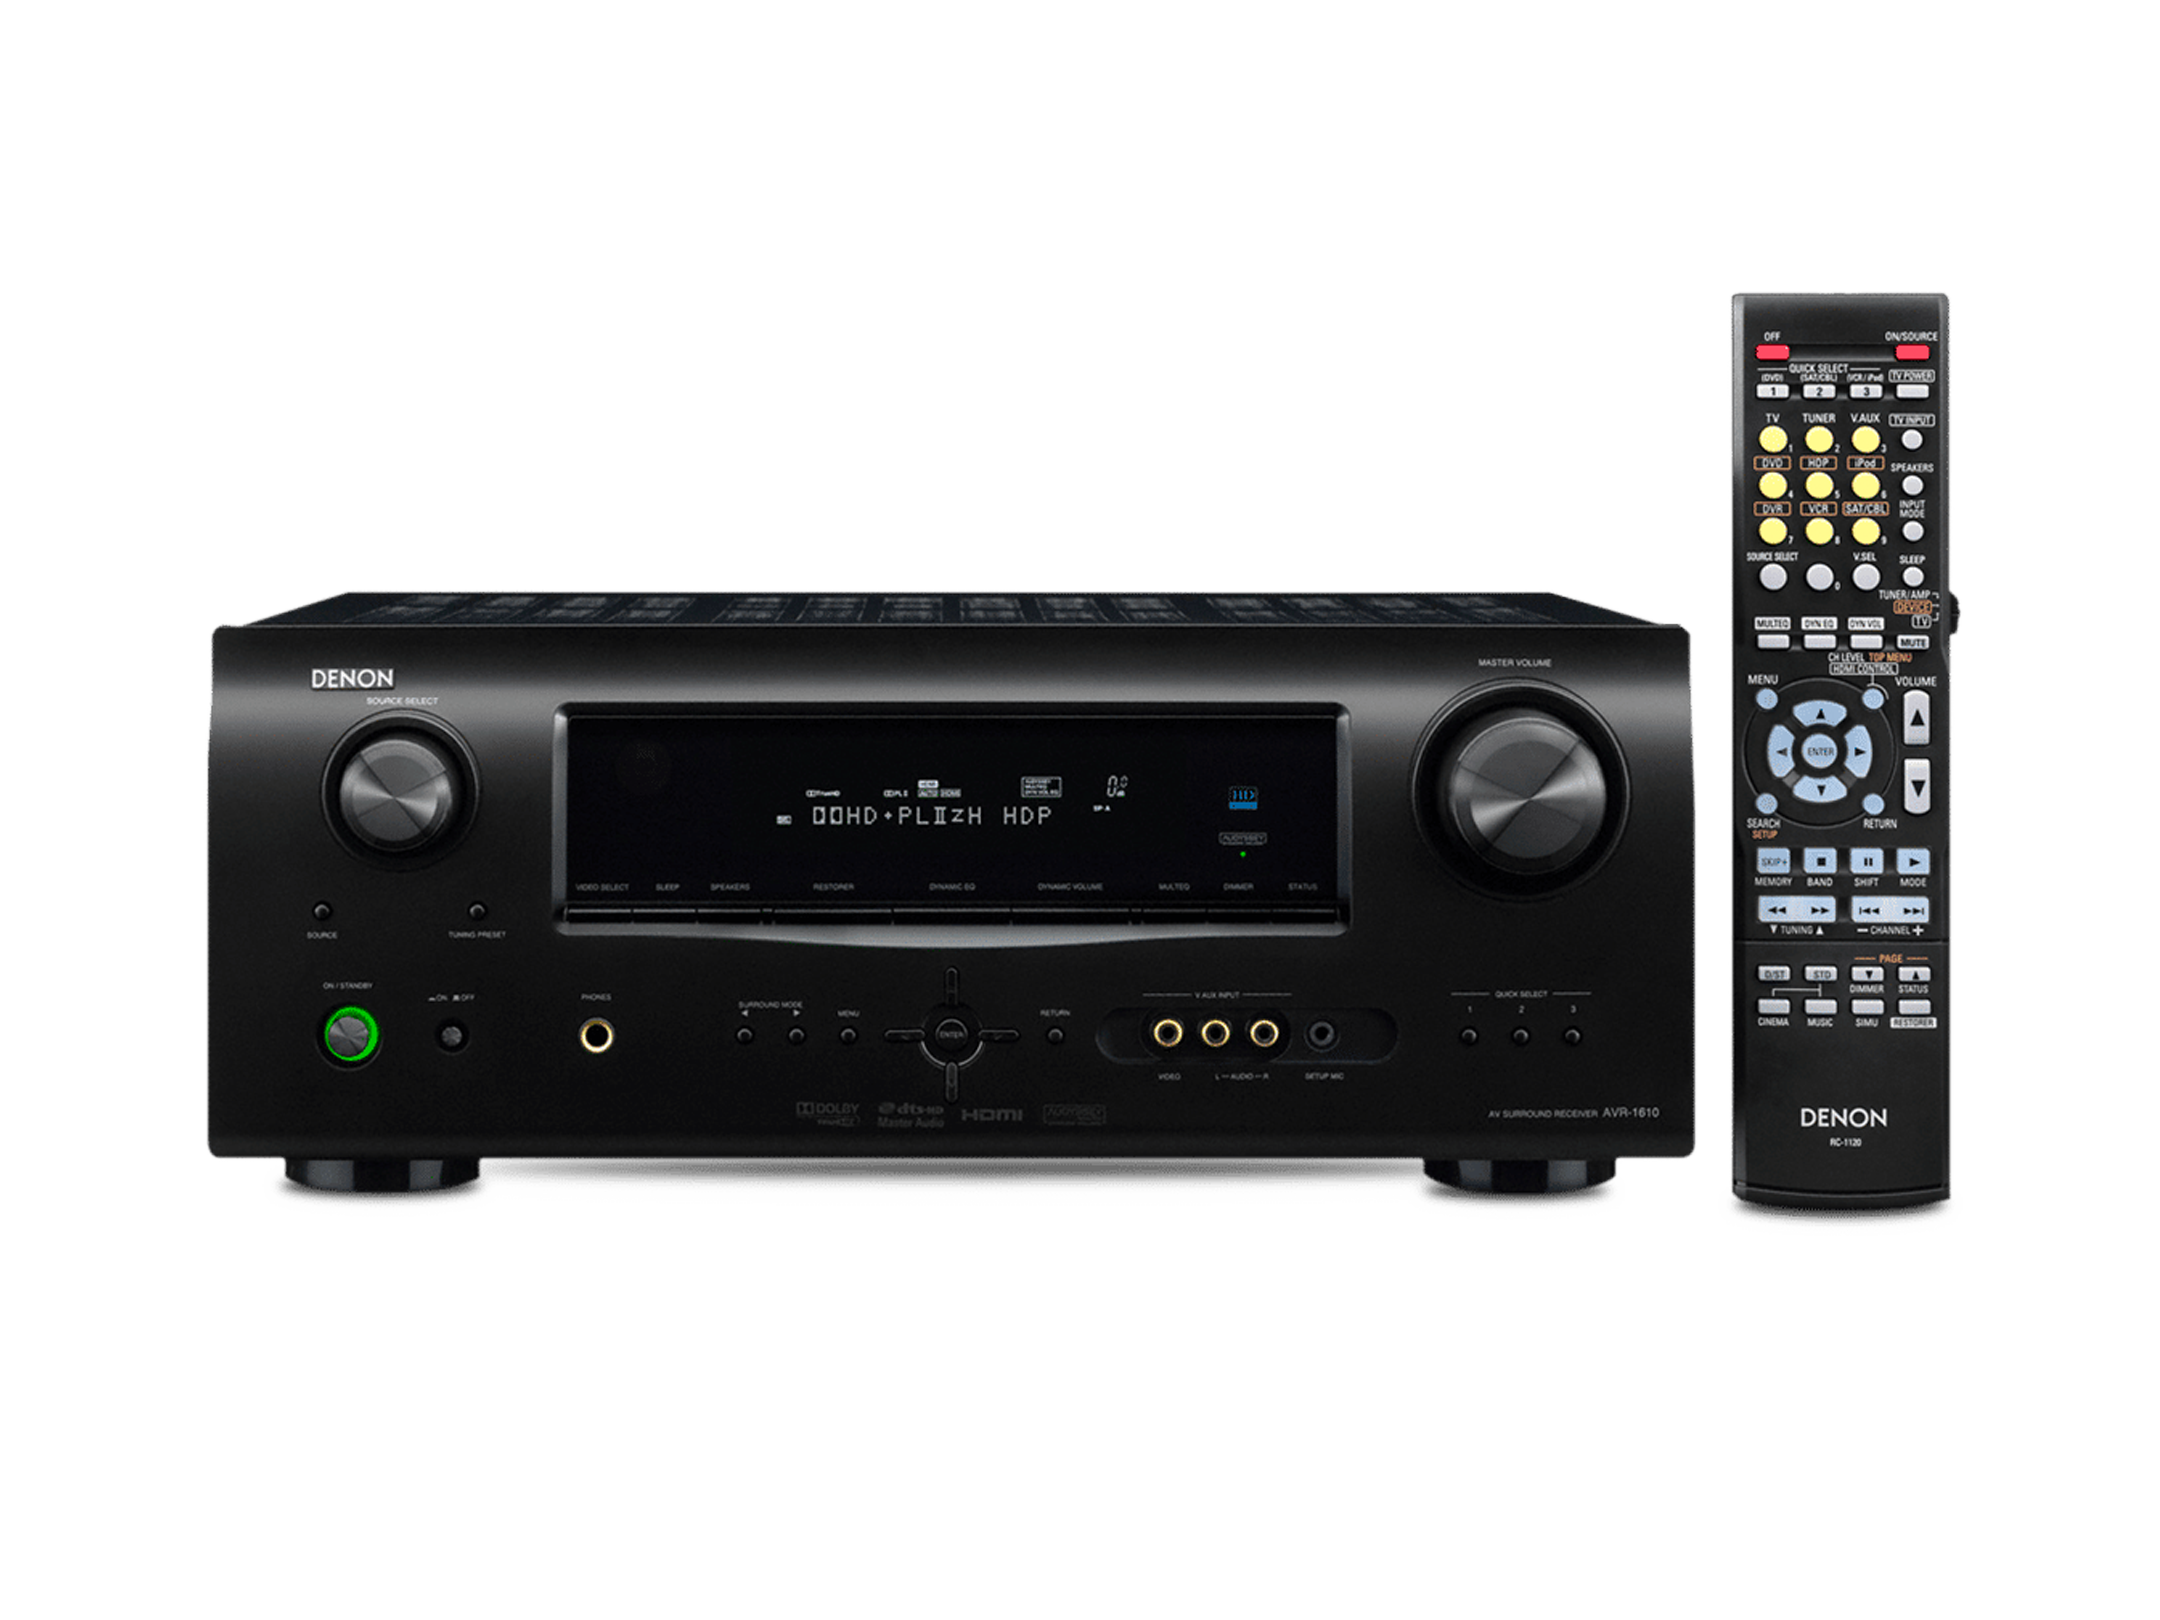 AVR-1610 - Denon AVR-1610 Home theater receiver with HDMI switching